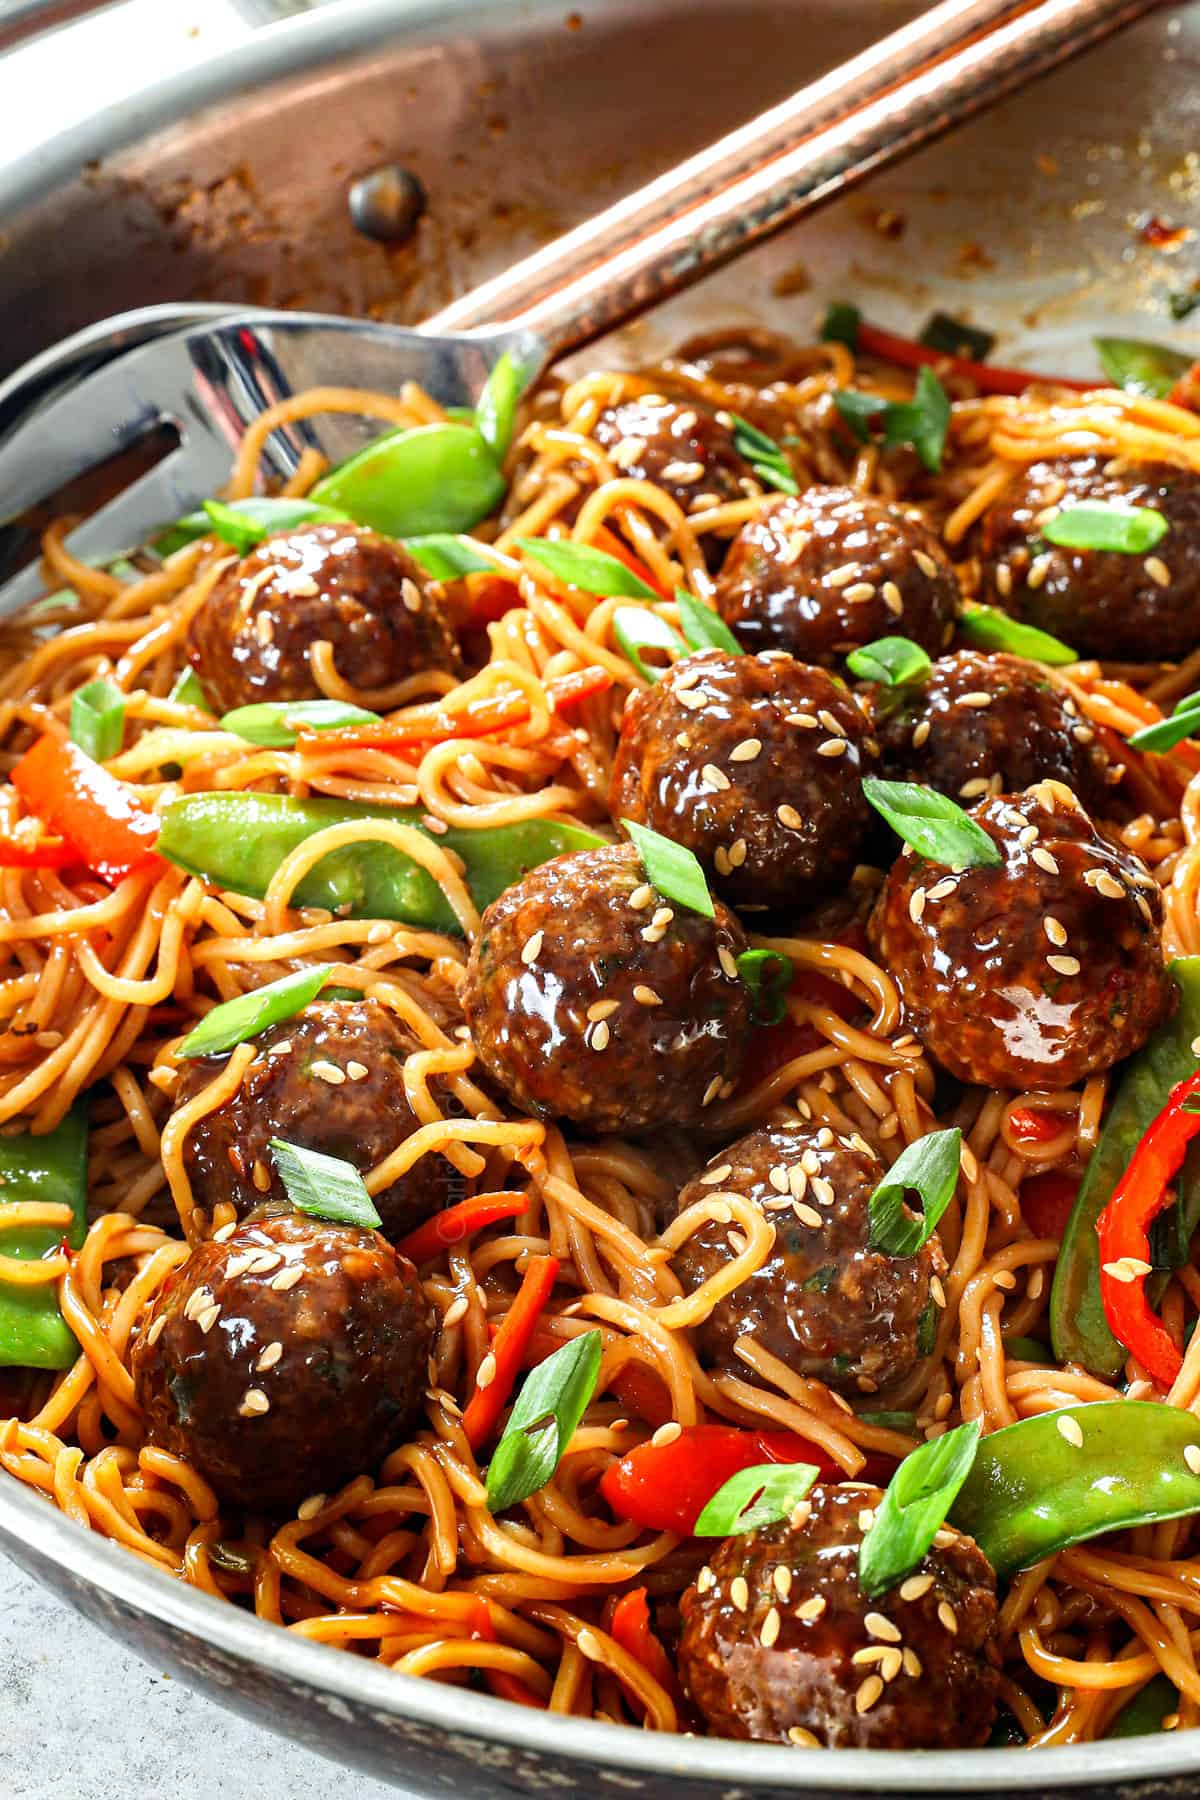 showing how to make Asian meatballs by combining meatballs and sauce